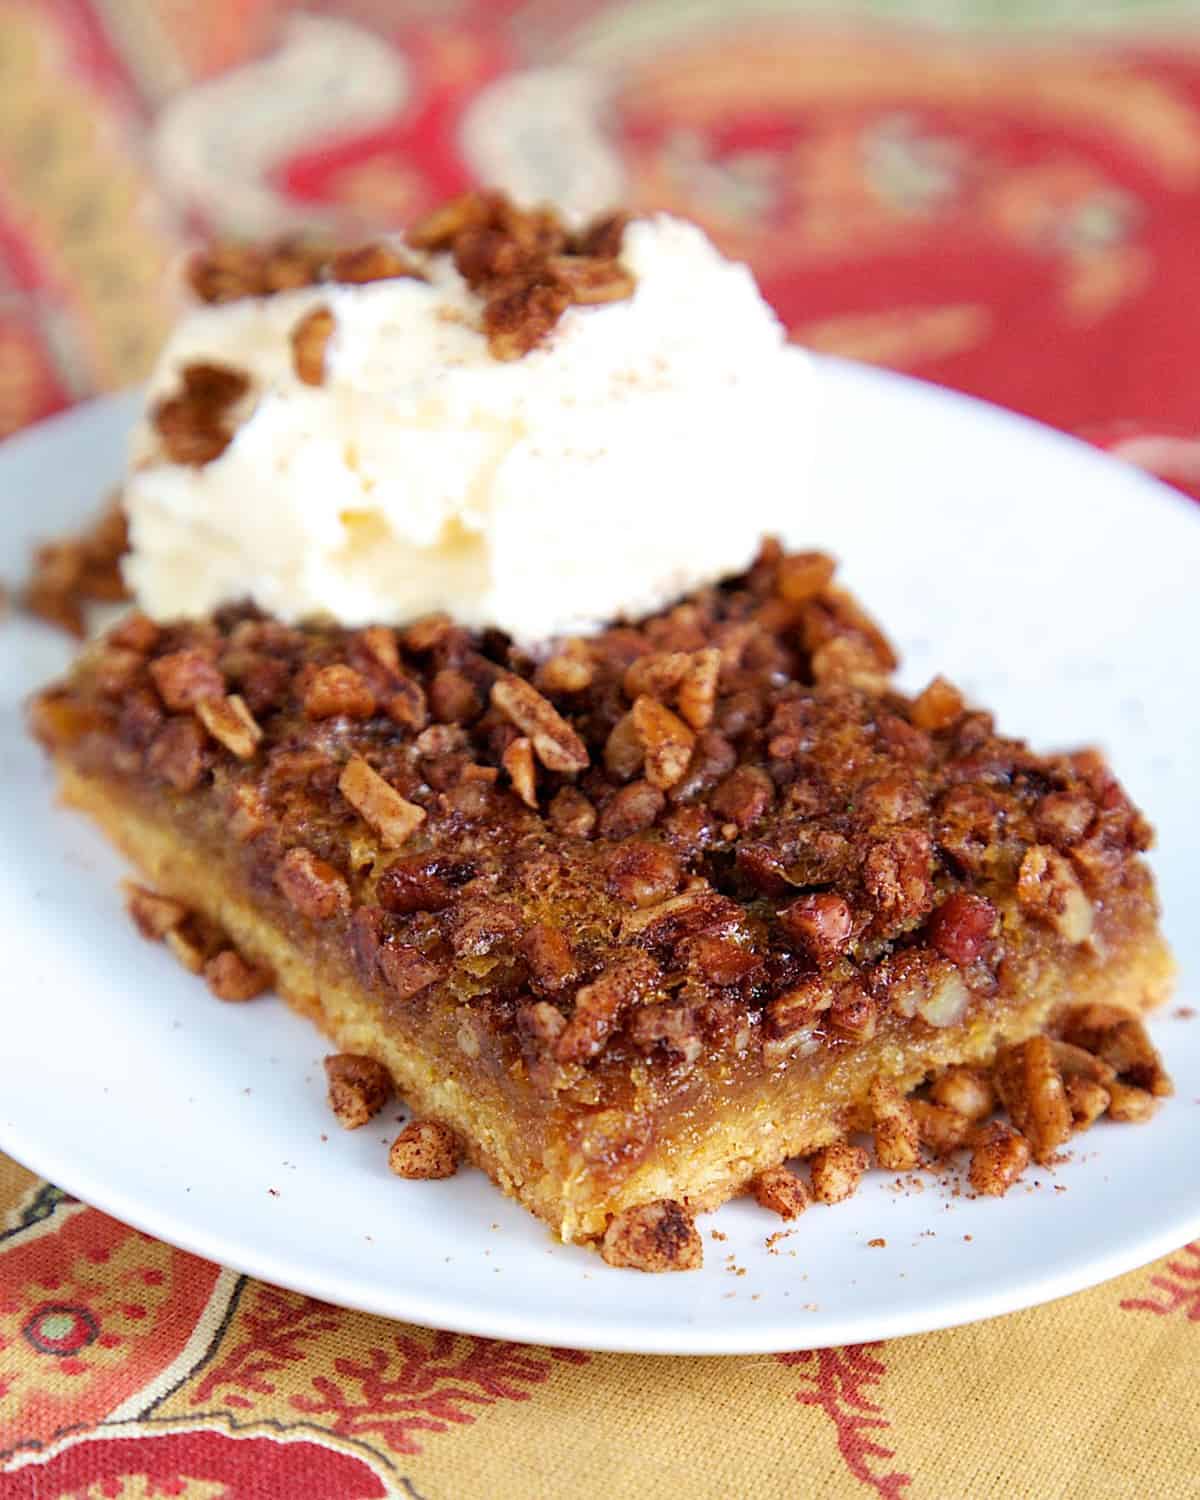 Gooey Pecan Bars - cake mix crust topped with yummy pecan pie filling. Serve warm with ice cream! Perfect for holiday meals! Everyone RAVES about this easy dessert recipe!